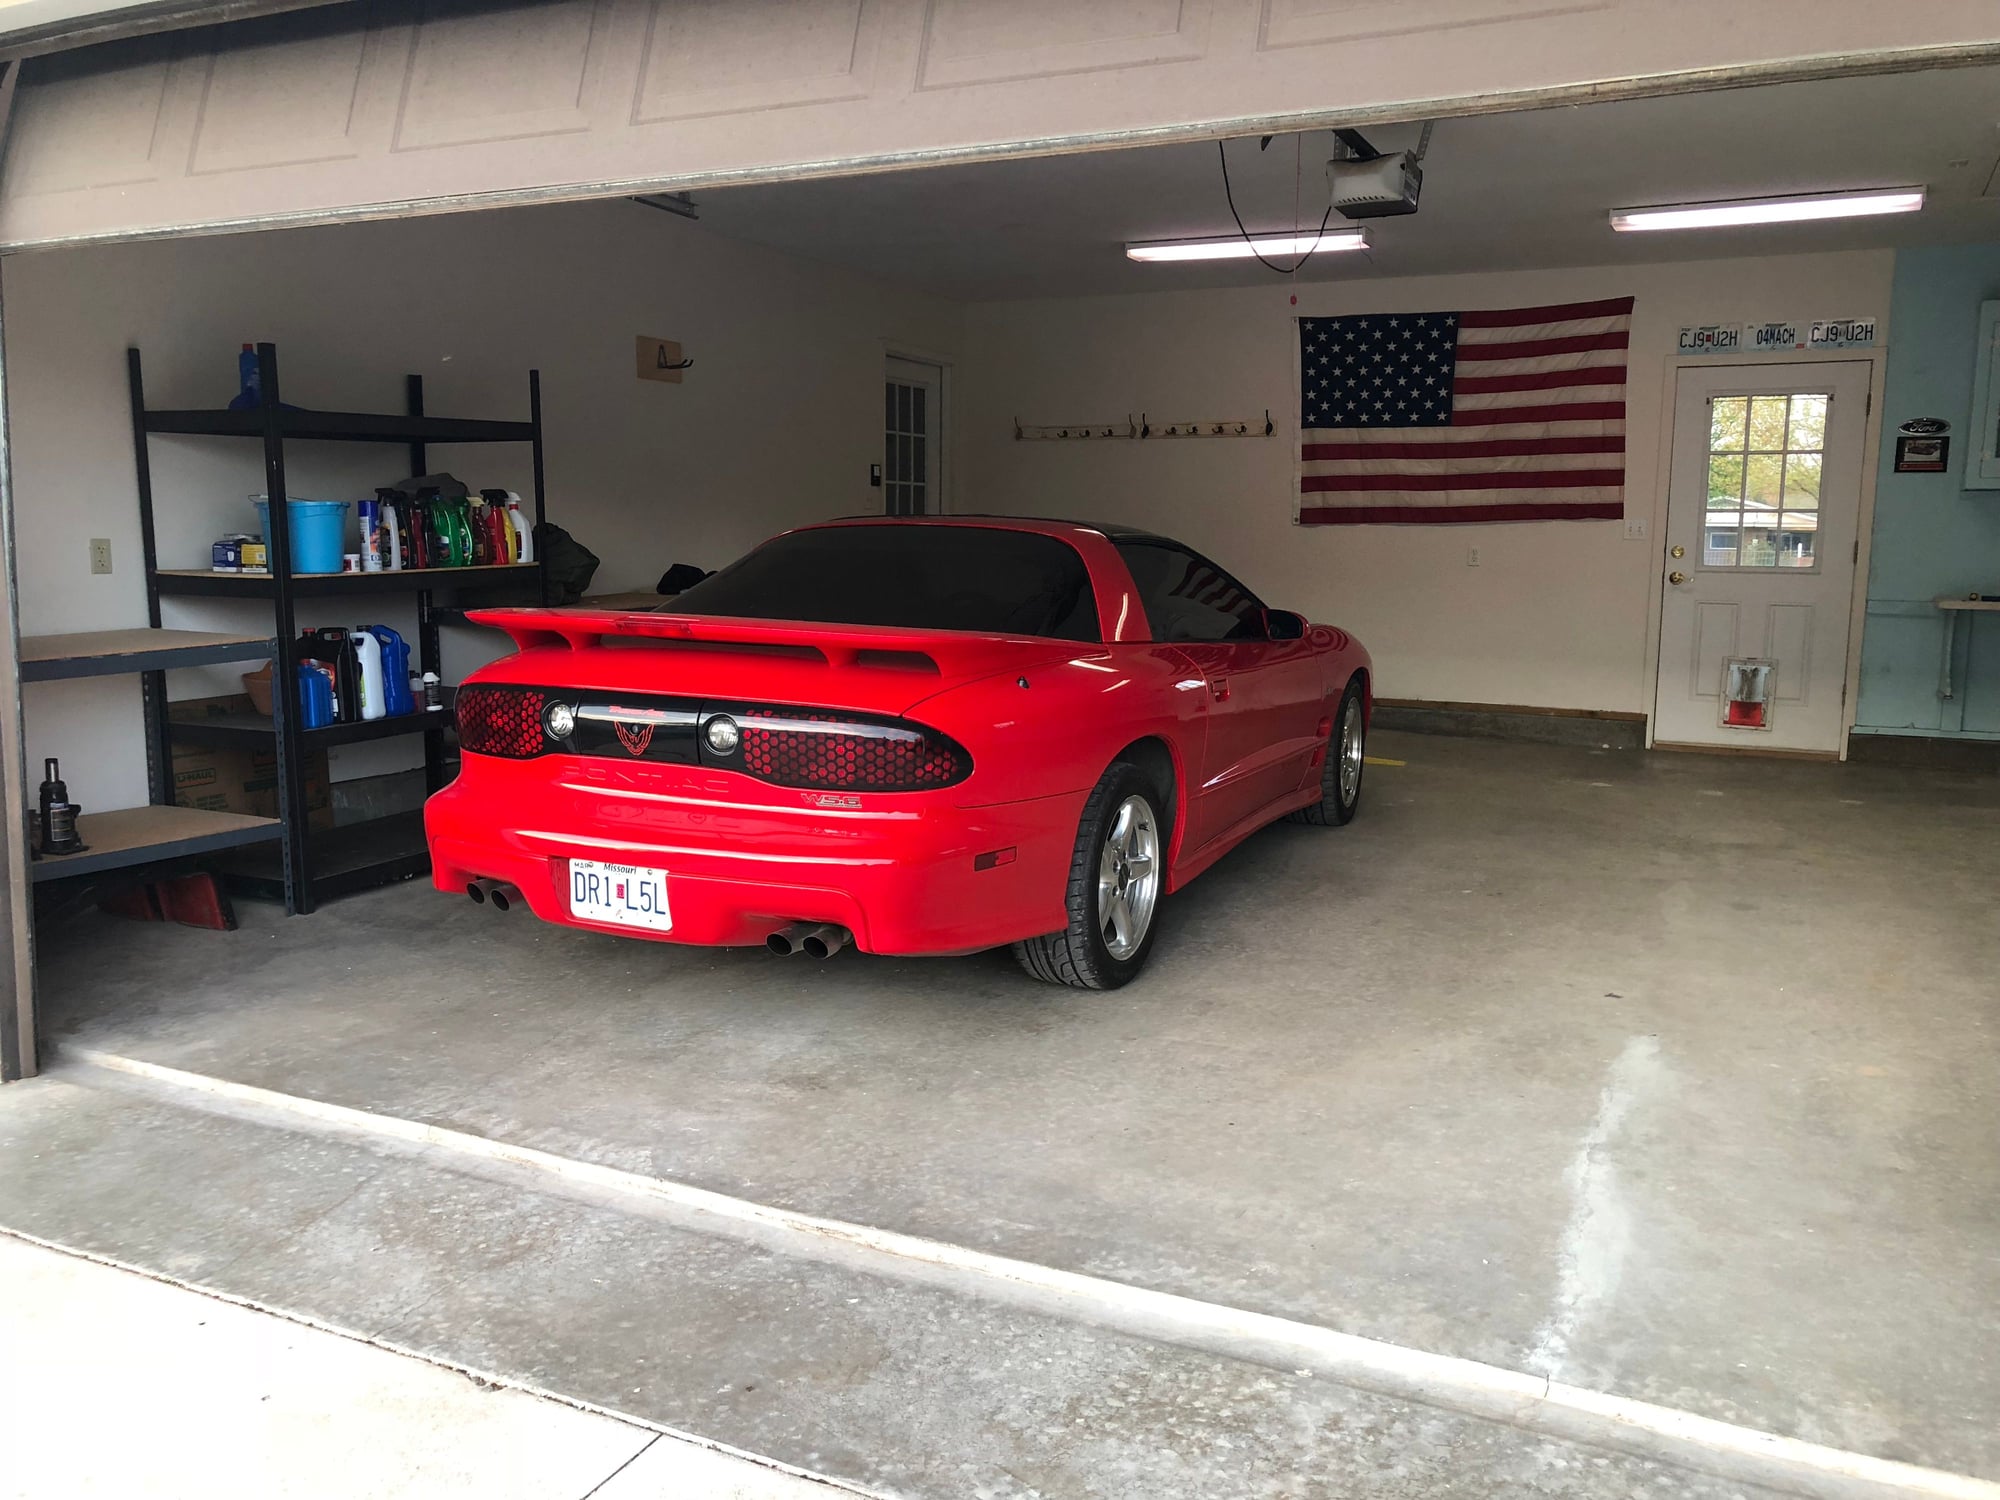 1998 Pontiac Firebird - 1998 Trans Am WS6 - Used - VIN 123455677899 - 36,000 Miles - 8 cyl - 2WD - Manual - Coupe - Red - Enid, OK 73703, United States